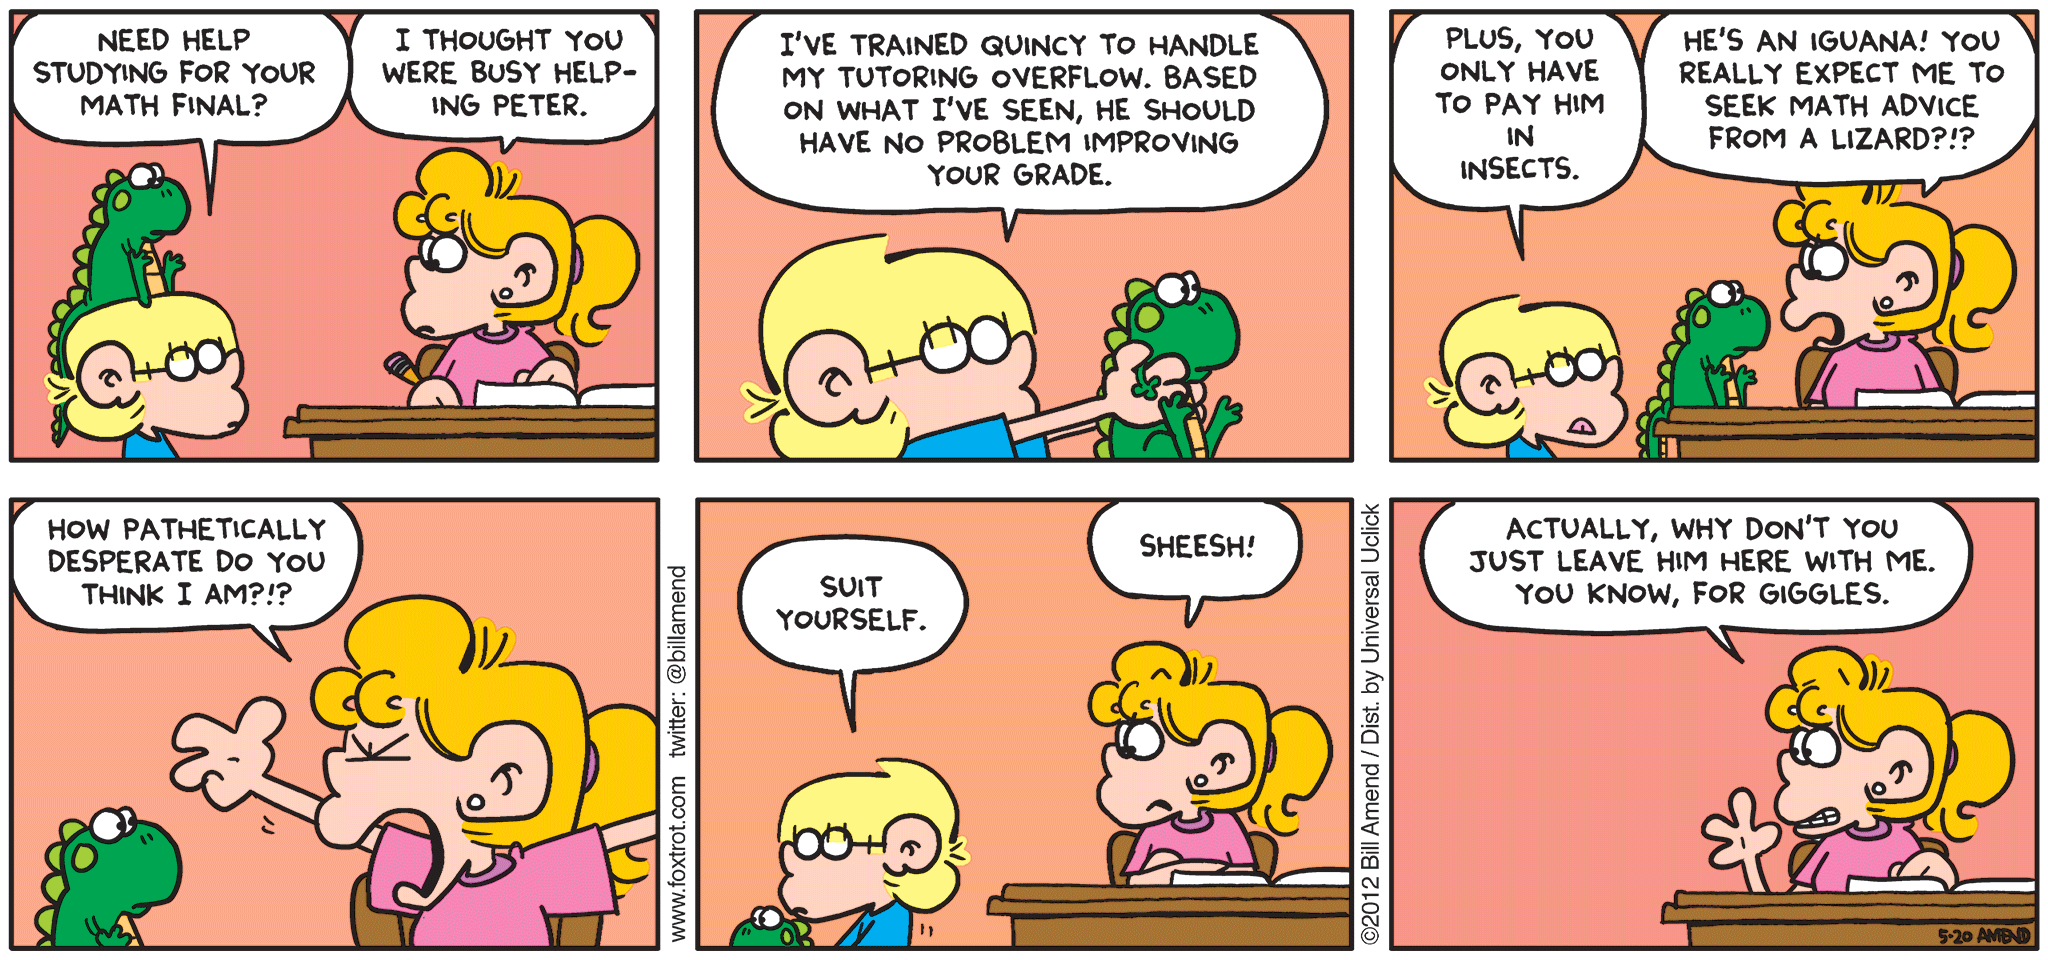 FoxTrot comic strip by Bill Amend - "But Just for Giggles" published May 20, 2012 - Jason: Need help studying for your math final? Paige: I thought you were busy helping Peter. Jason: I've trained Quincy to handle my tutoring overflow. Based on what I've seen, he should have no problem improving your grade. Plus, you only have to pay him in insects. Paige: He's an iguana! You really expect me to seek math advice from a lizard?!? How pathetically desperate do you think I am?!? Jason: Suit yourself. Paige: Sheesh! Actually, why don't you just leave him here with me. You know, for giggles.